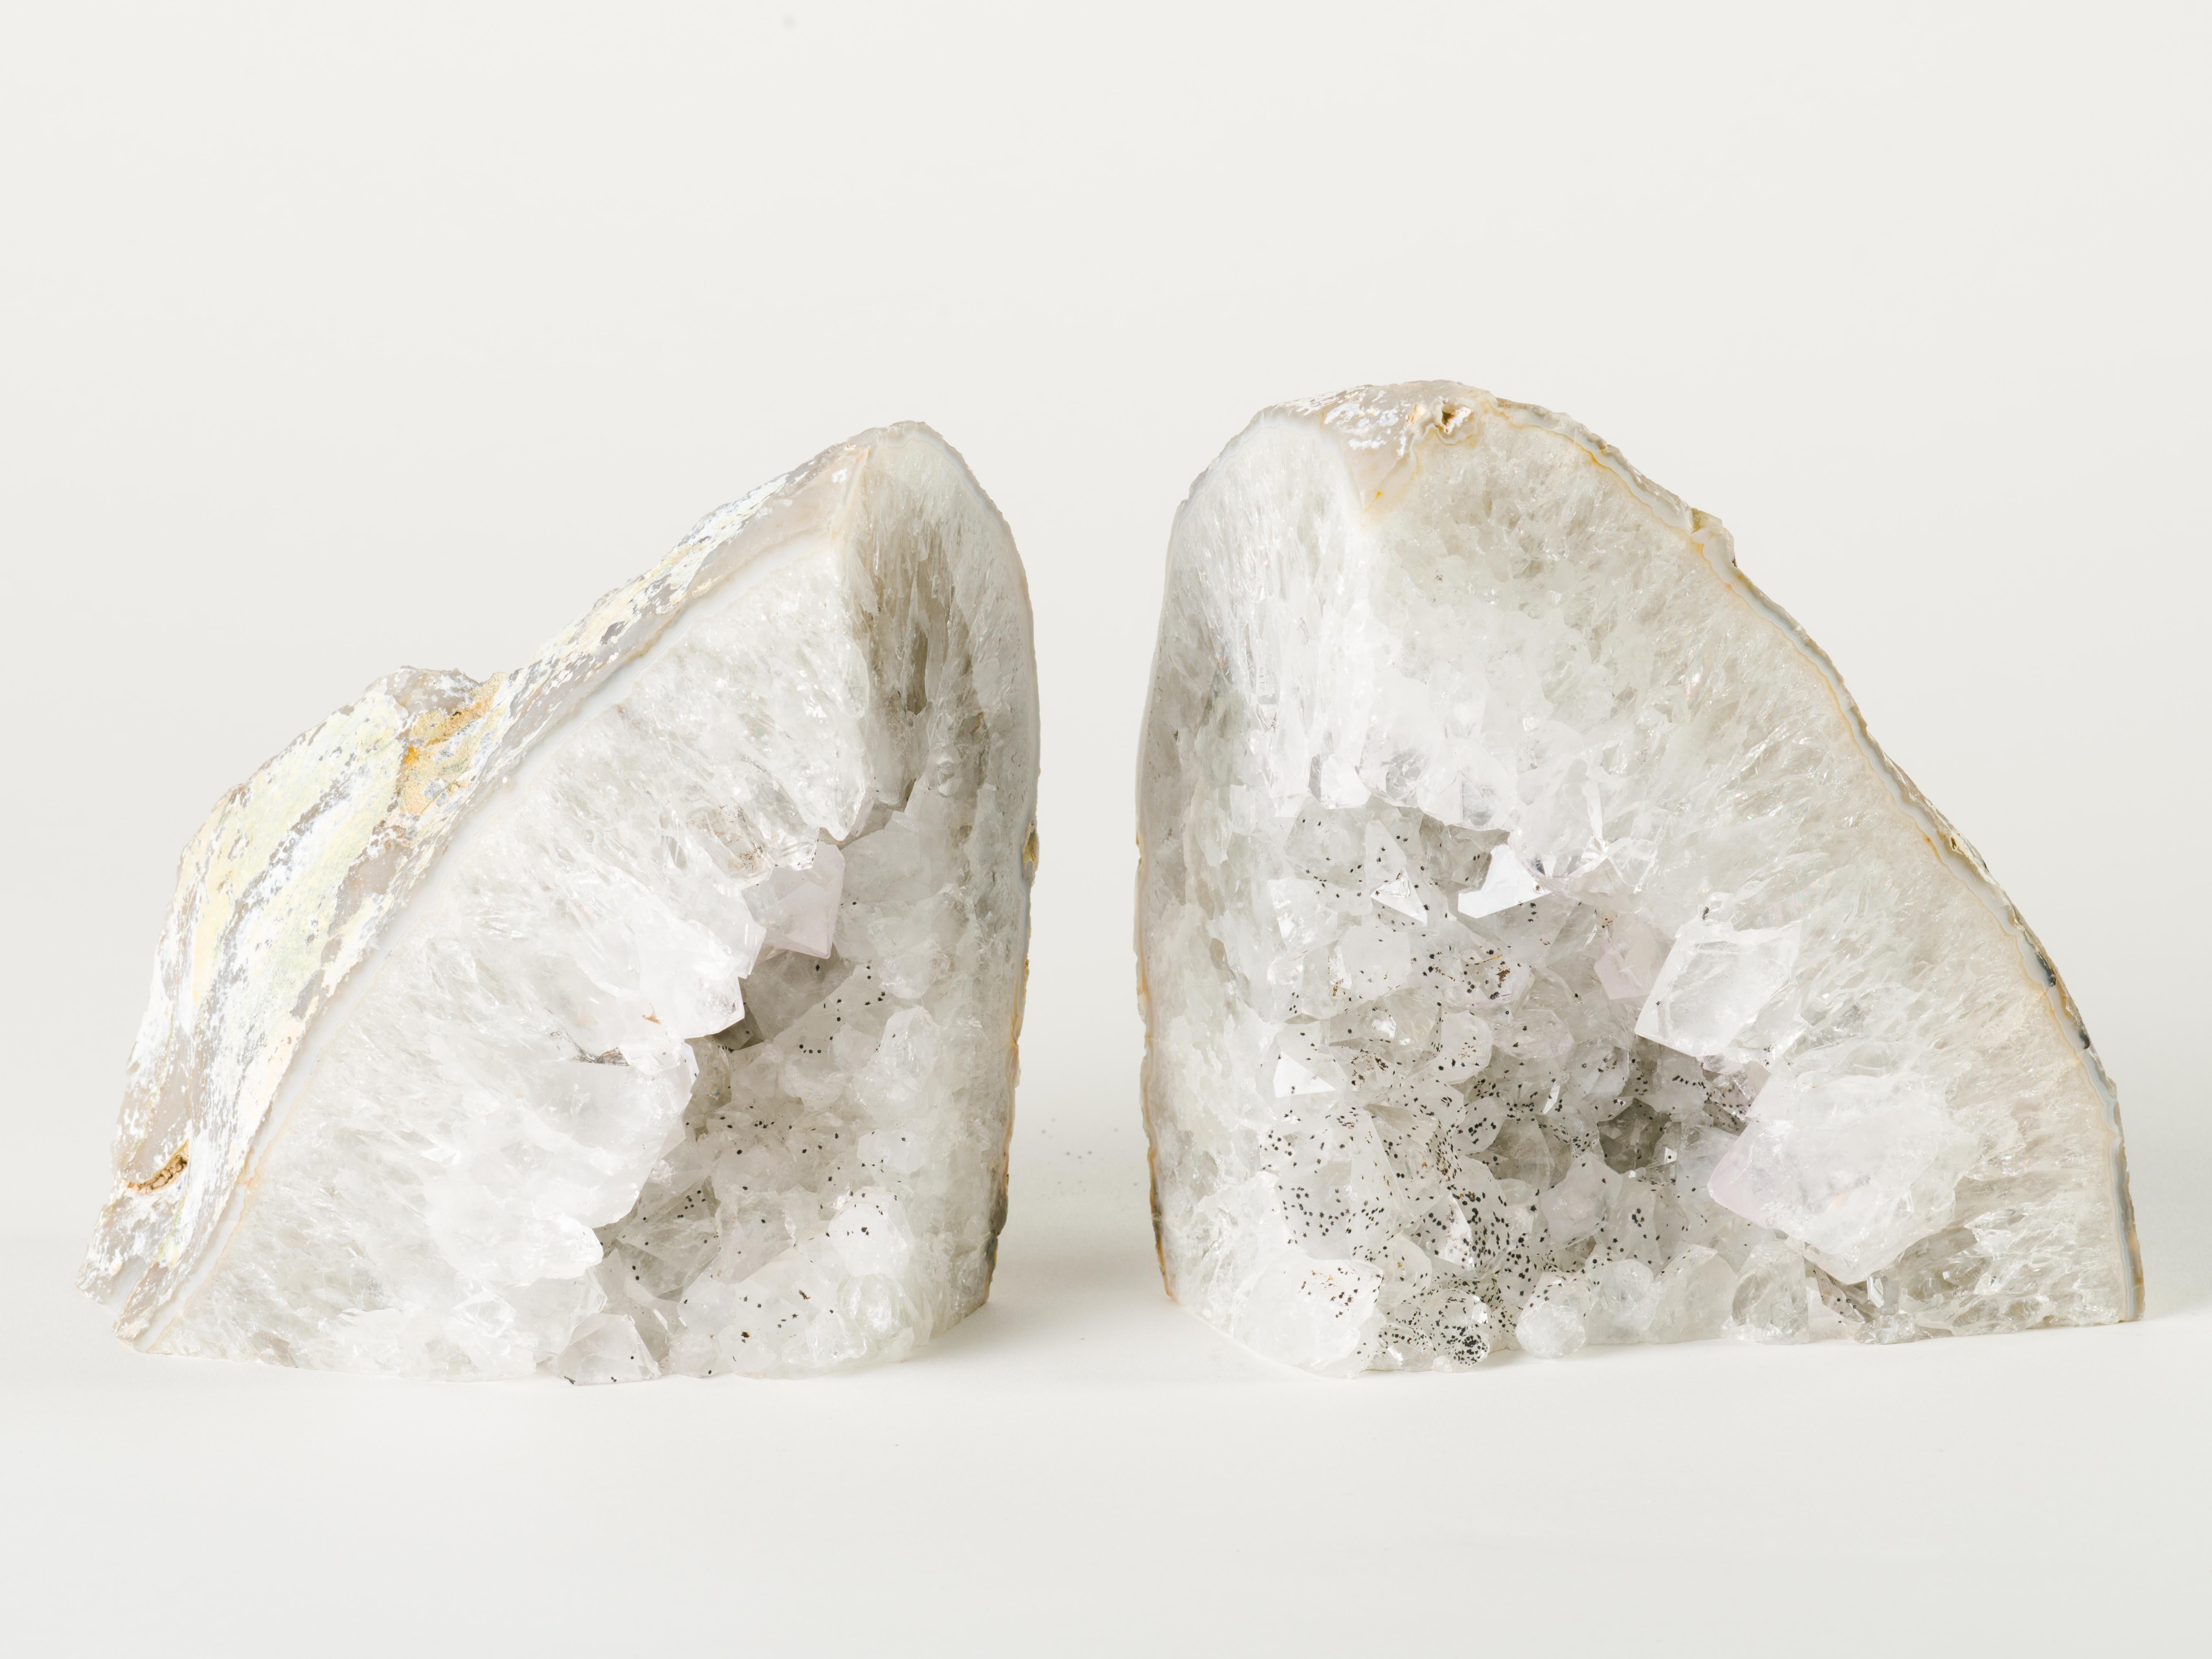 Pair of natural quartz crystal specimens with polished fronts and gorgeous rock crystal centres. The bookends have varying hues of white and silver and feature unusual speckles in gunmetal or black. Stunning from all angles and completely different